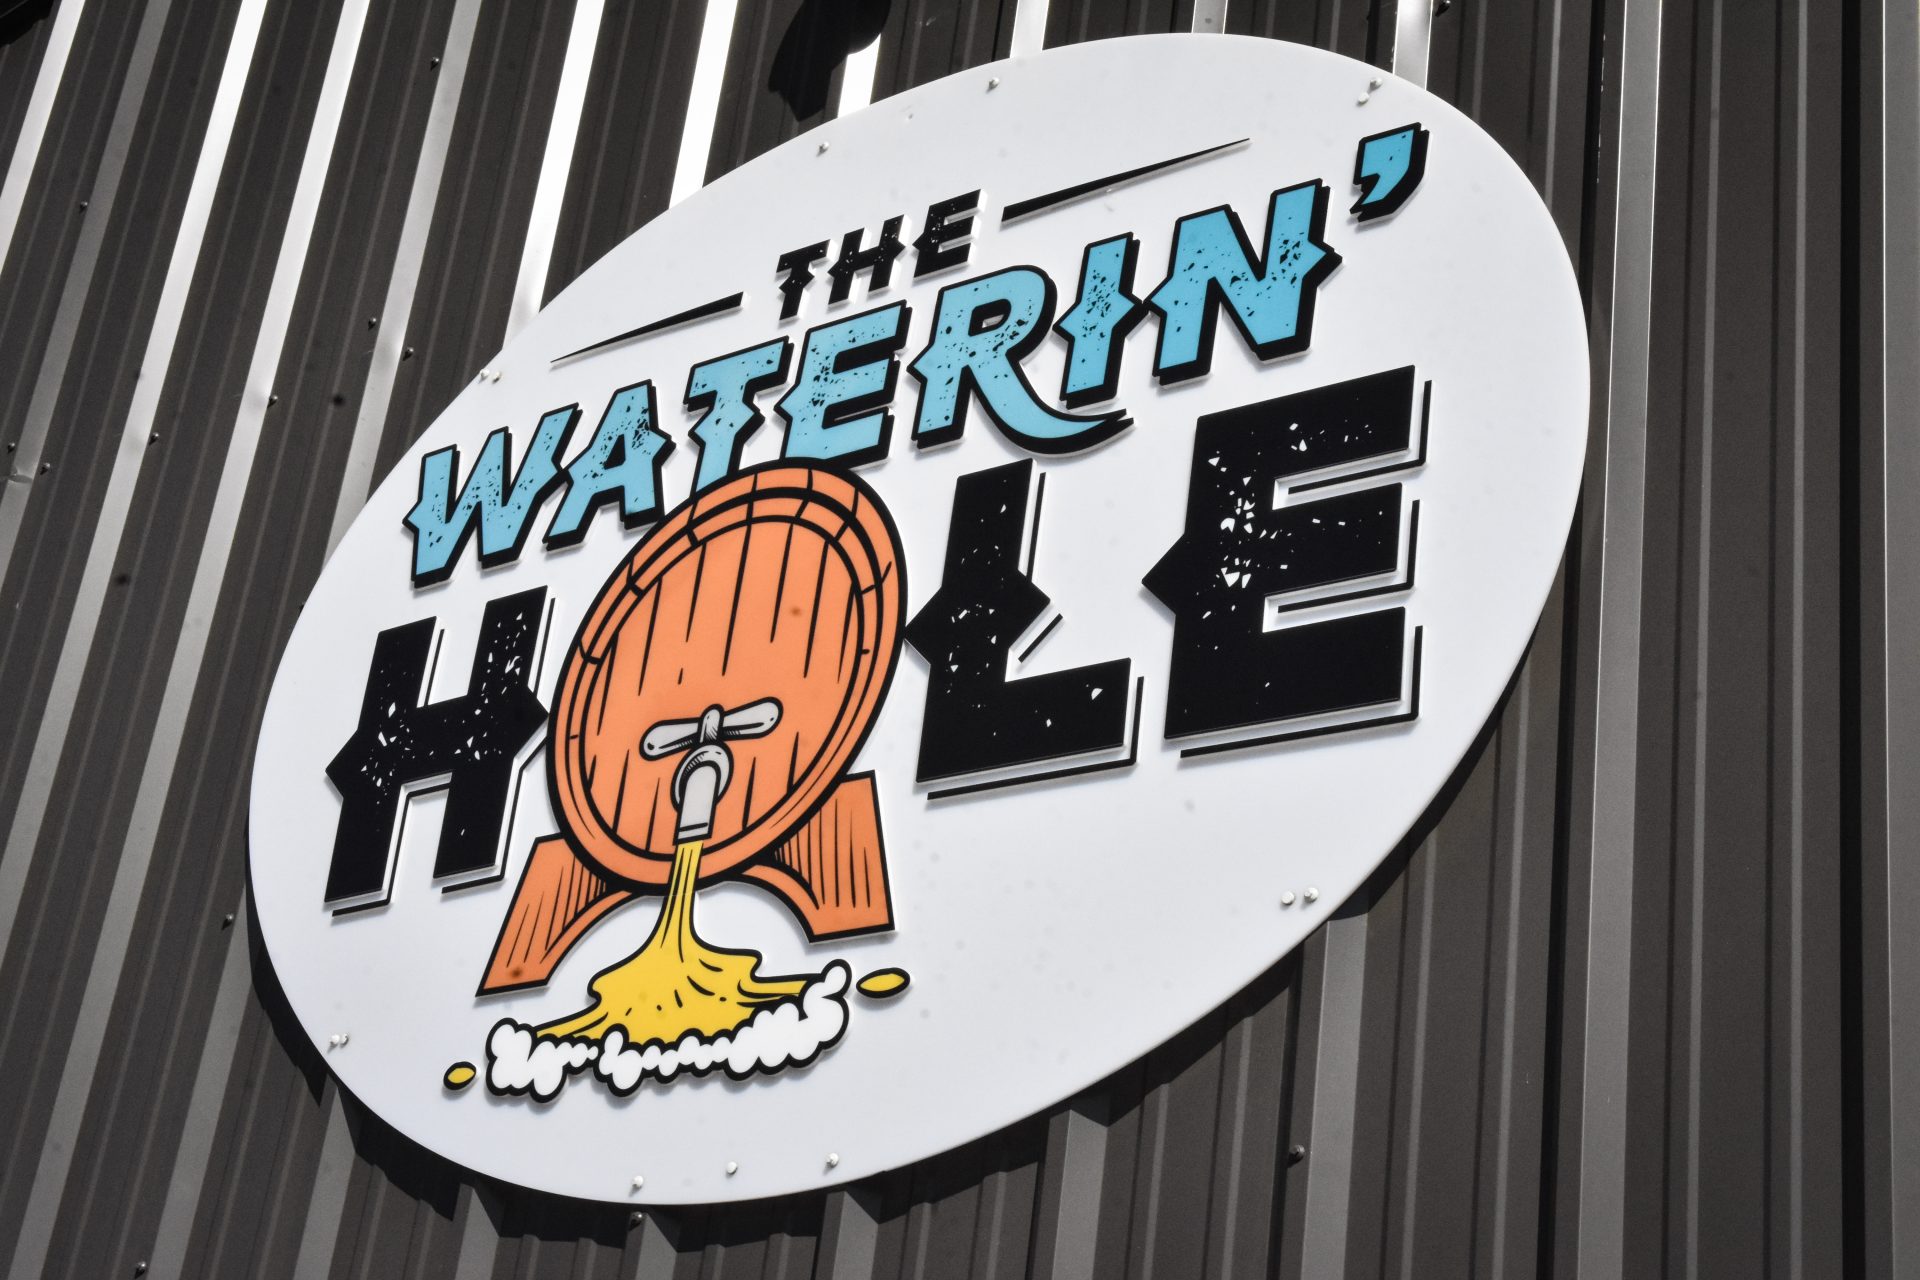 The Waterin' Hole